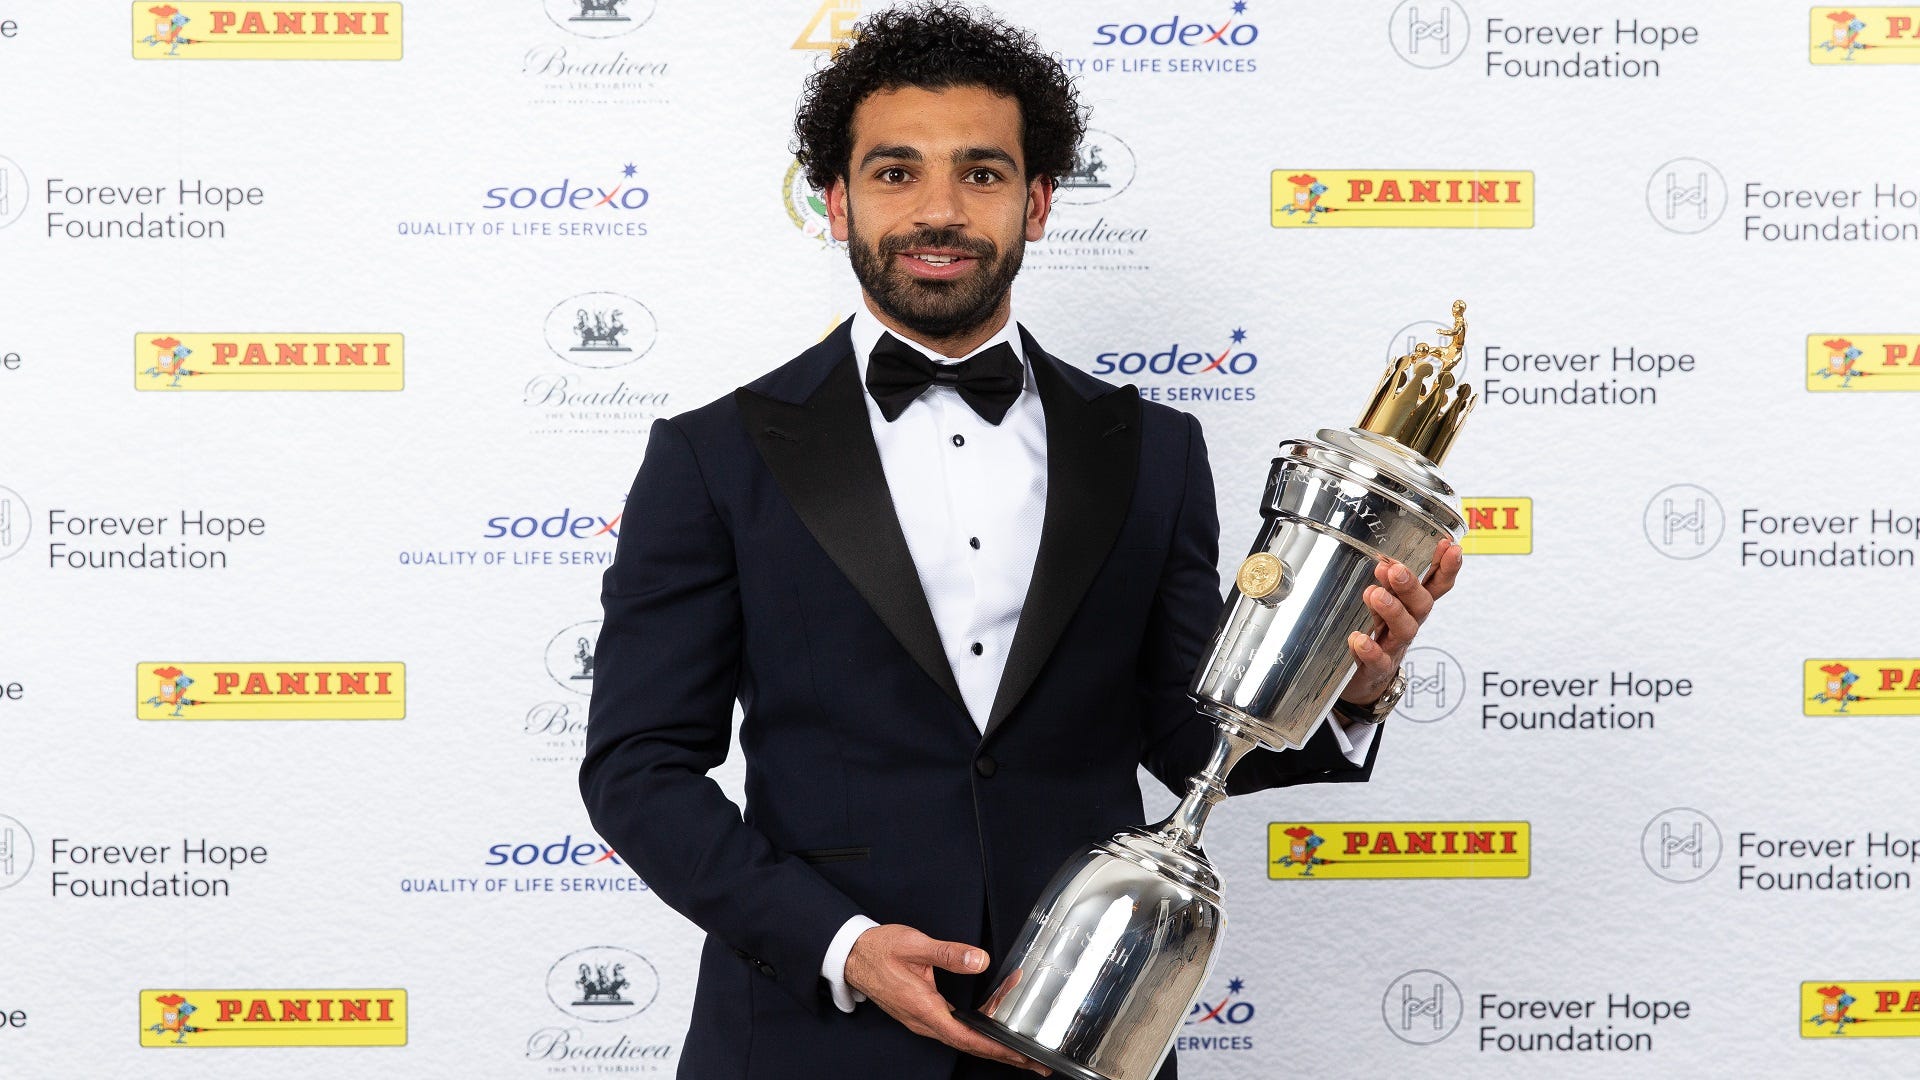 Mohamed Salah of Liverpool poses with the 2018 PFA Player Of The Year Award trophy at the Grosvenor House Hotel in London